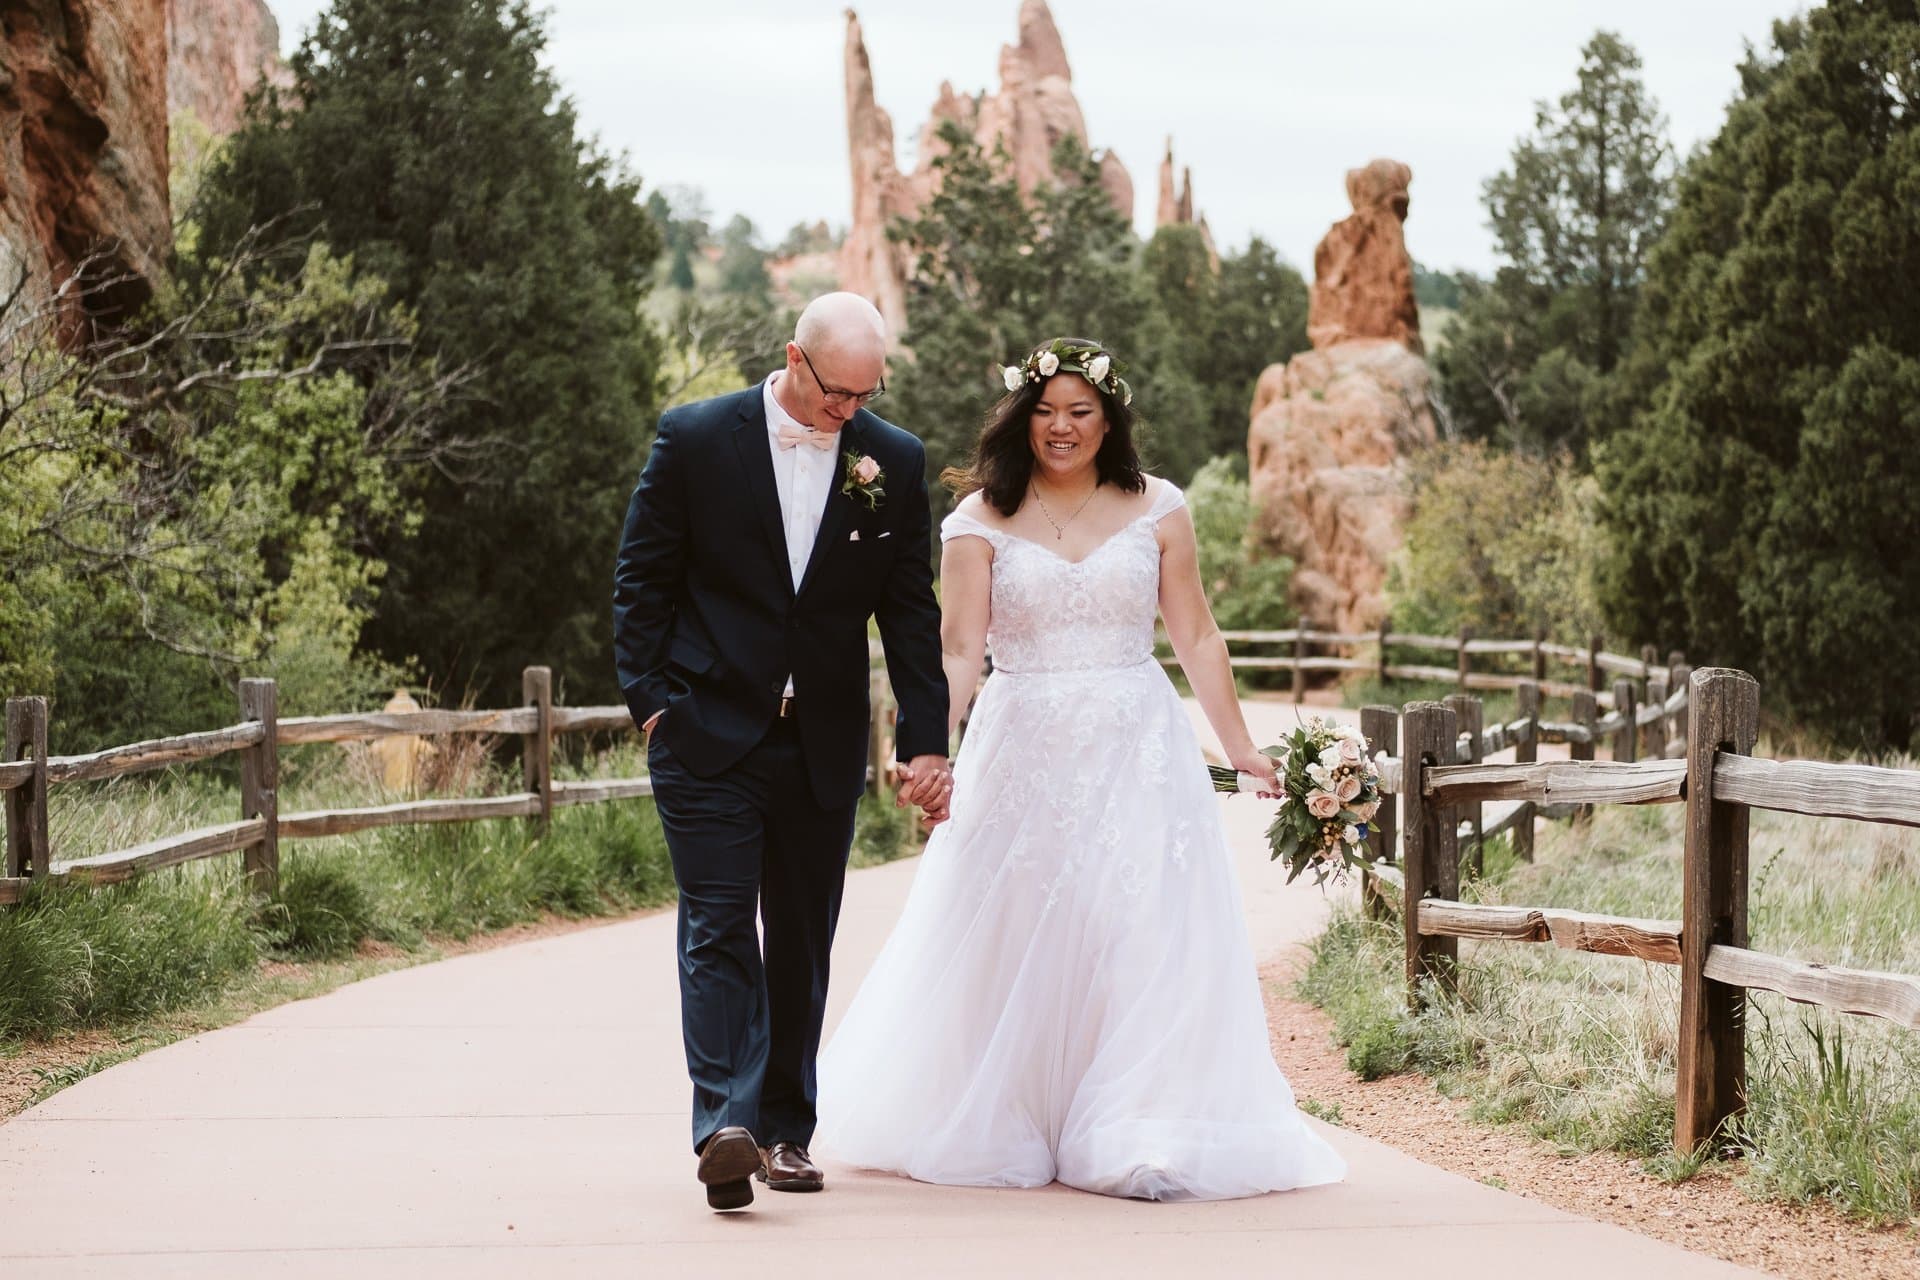 Bride and groom wedding photos at Garden of the Gods in Colorado with jagged red rocks